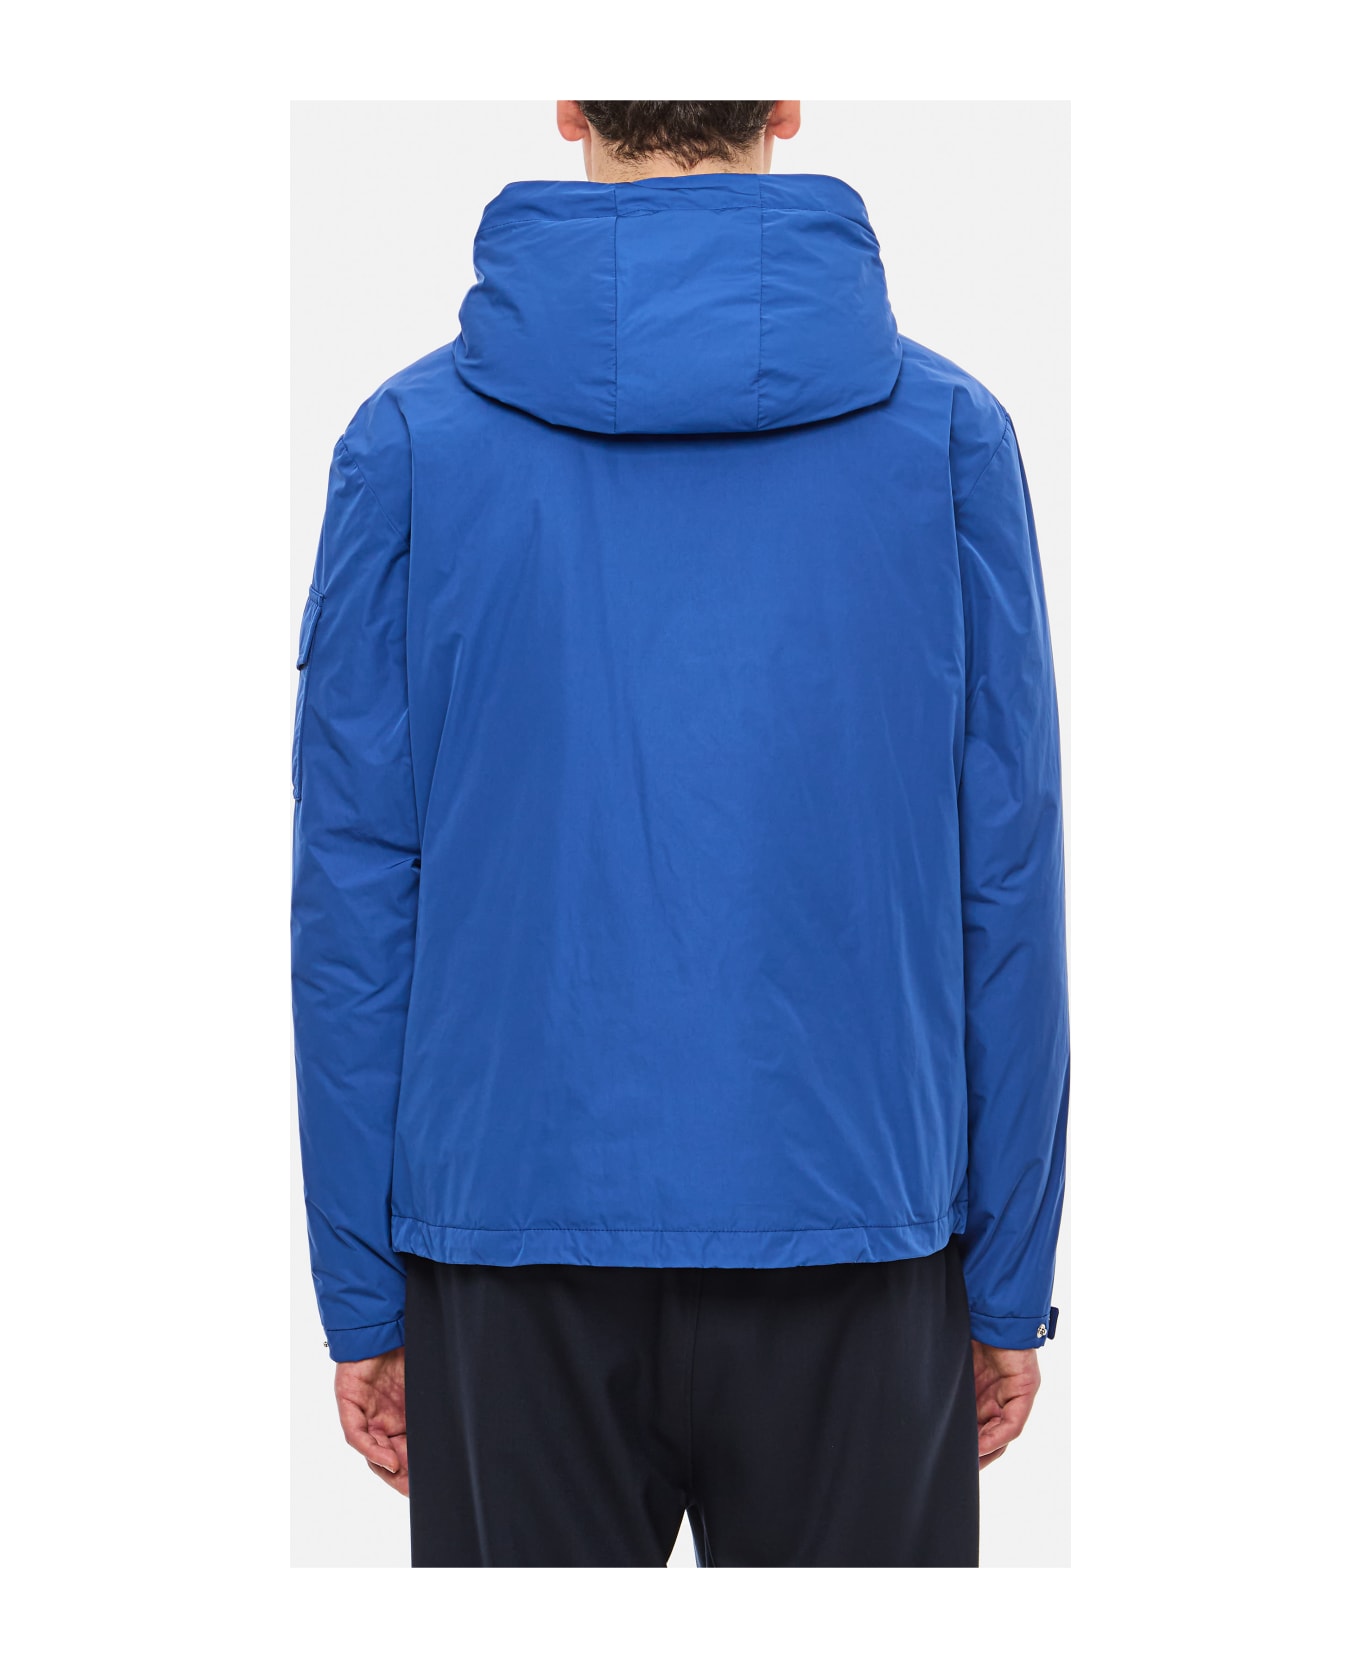 Moncler Granero Jacket - Clear Blue ブレザー